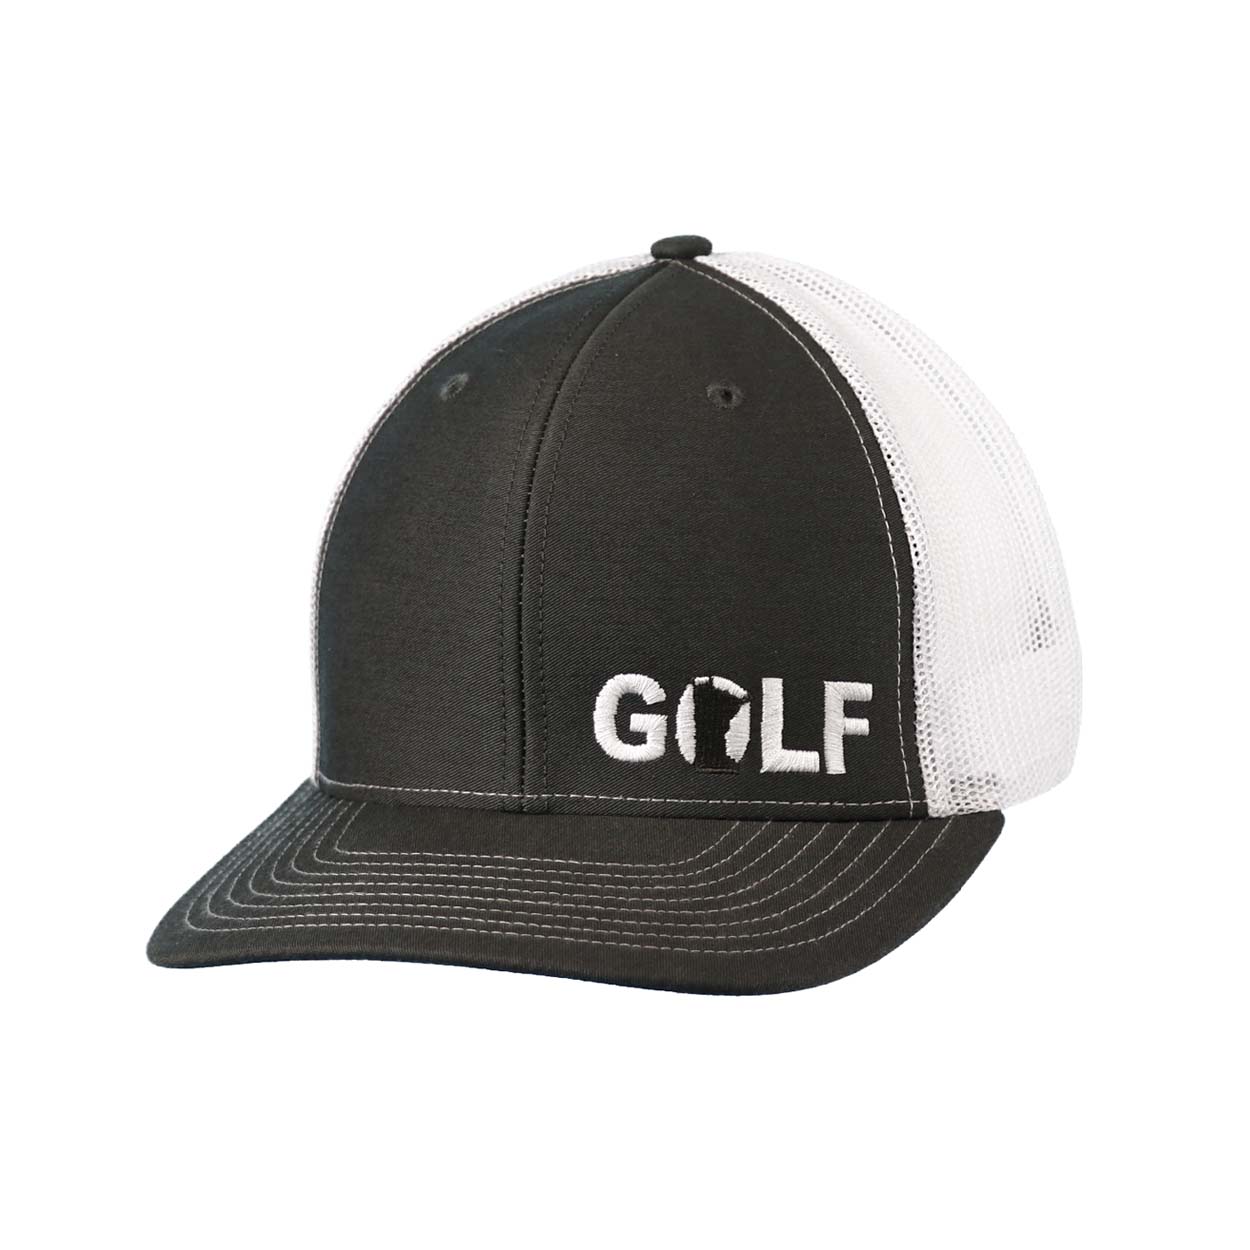 Golf Minnesota Night Out Pro Embroidered Snapback Trucker Hat Gray/White